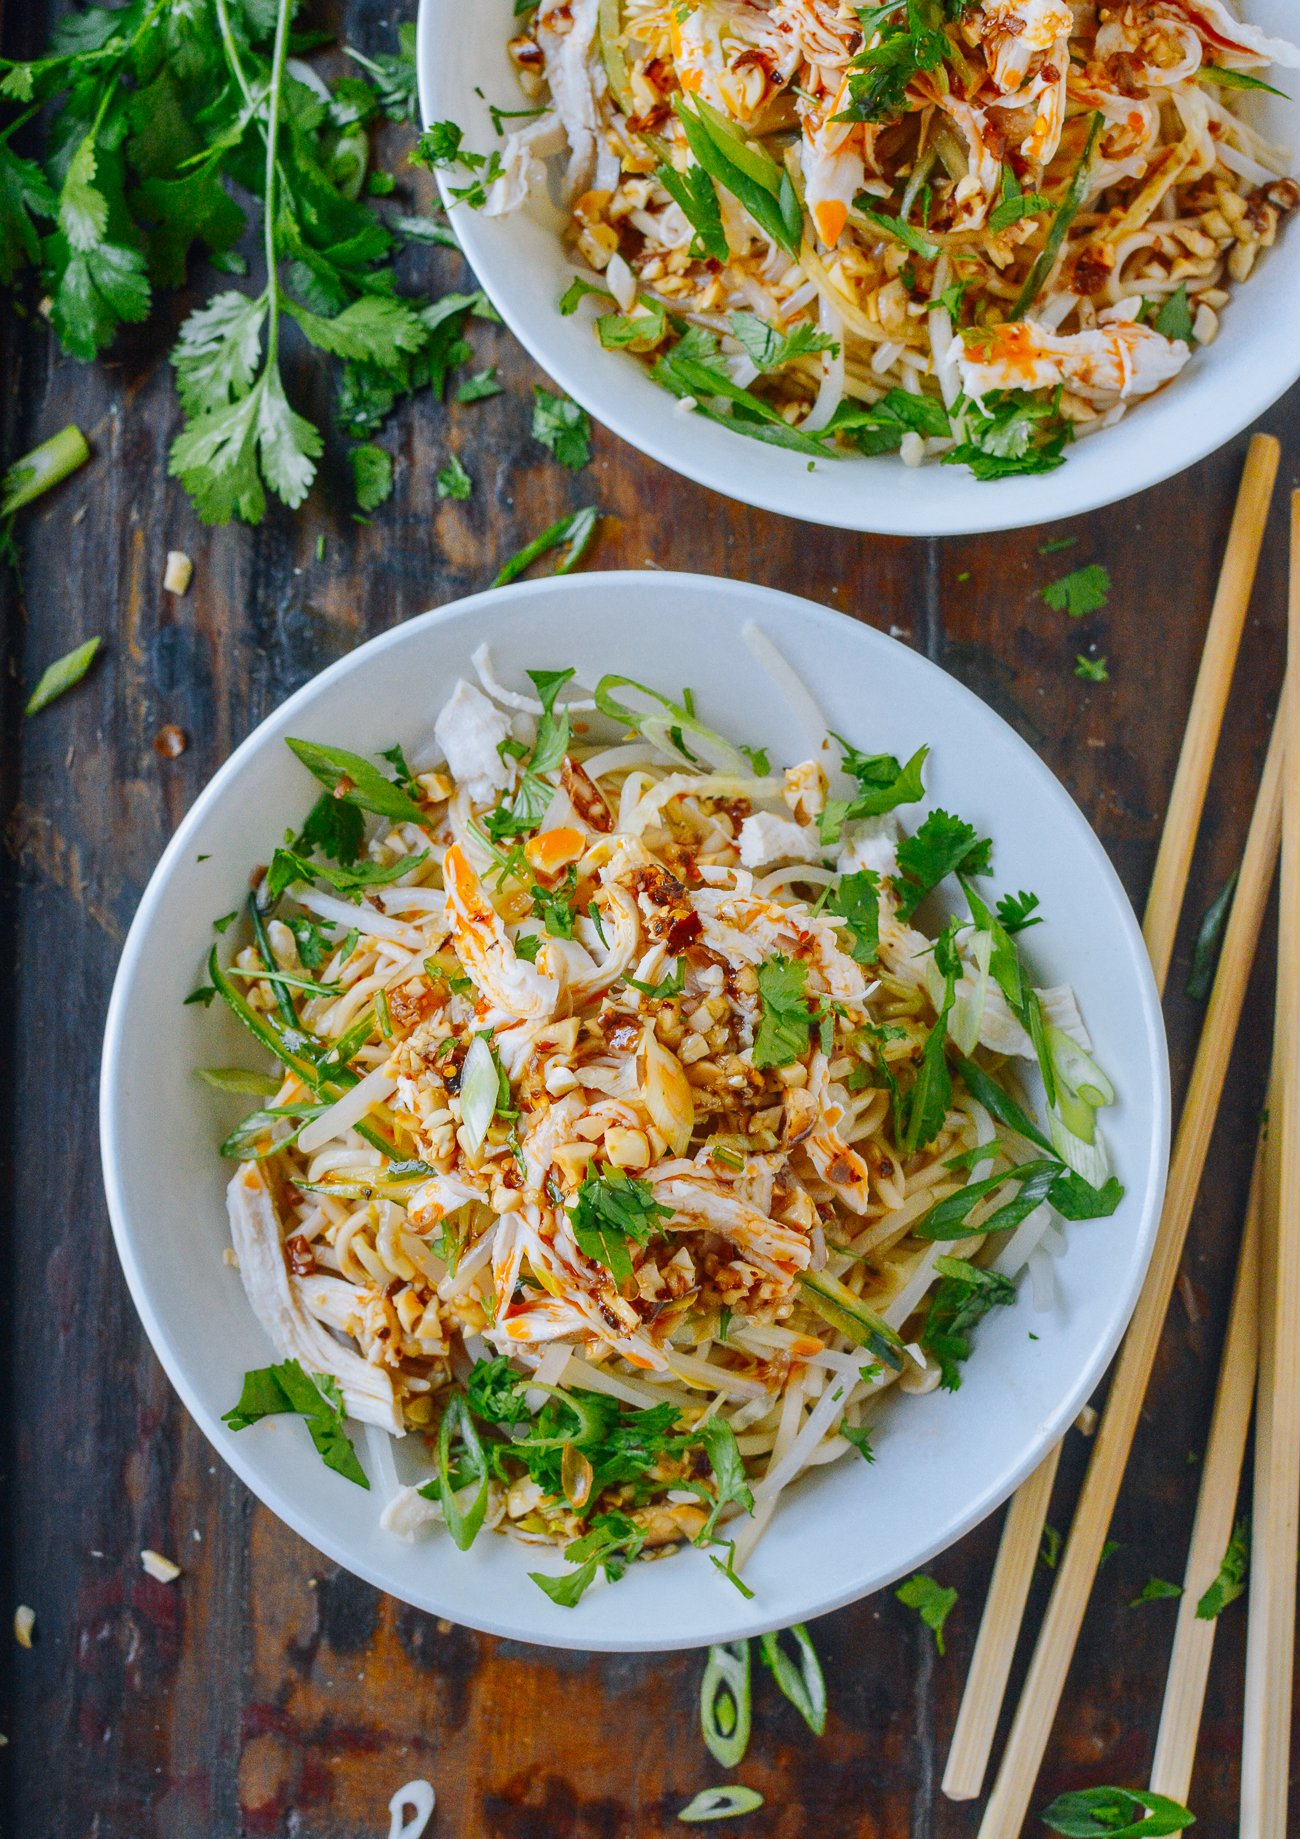 Cold Noodles with Shredded Chicken recipe